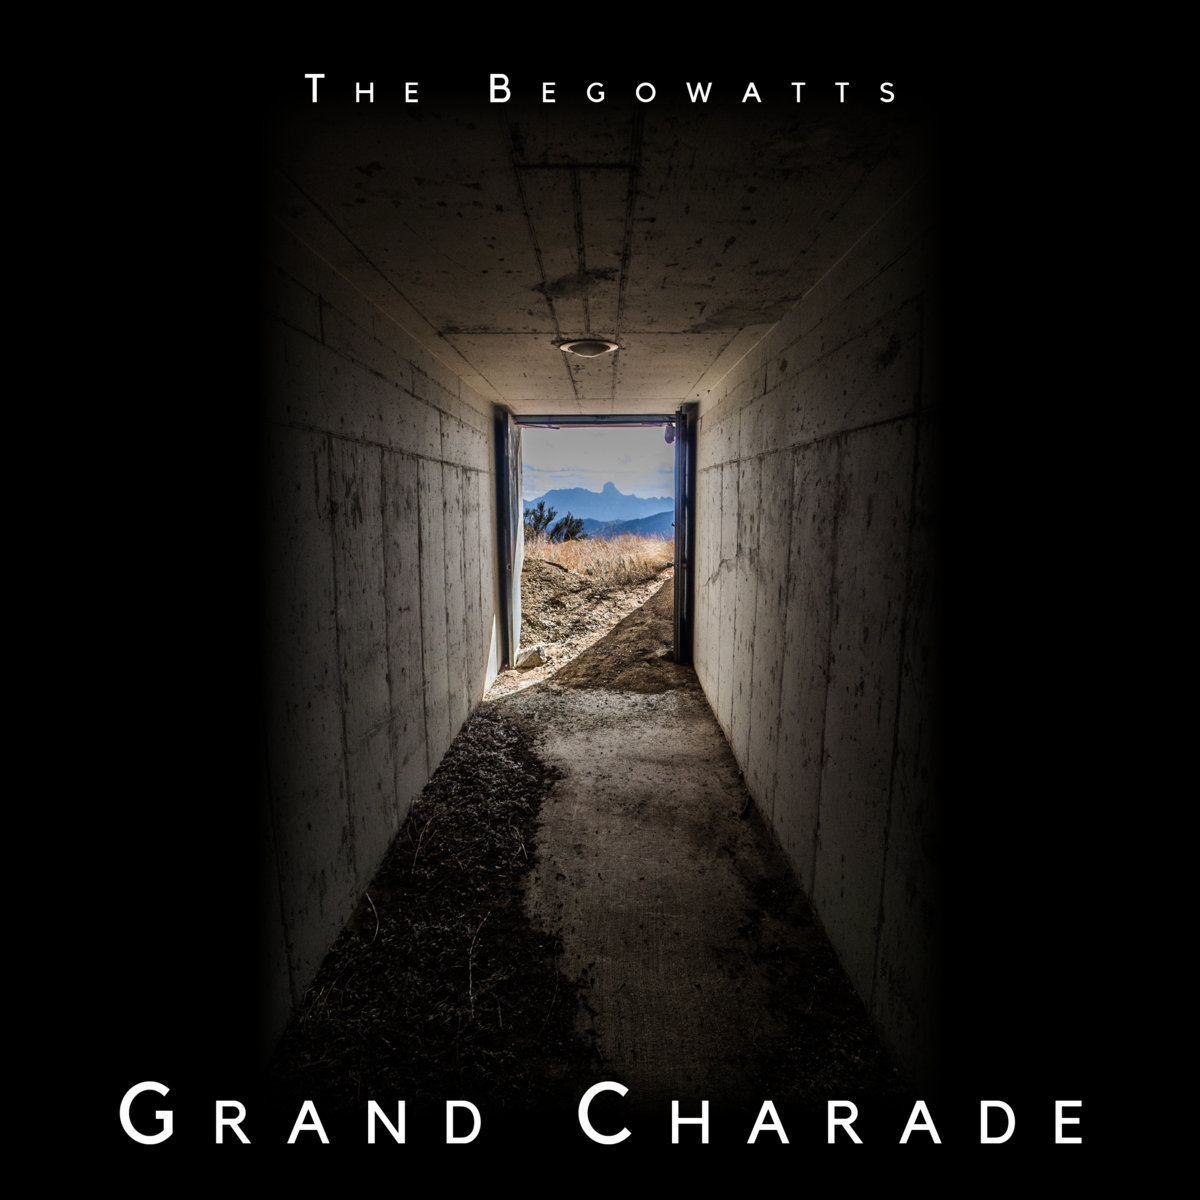 The Begowatts' Grande Charade